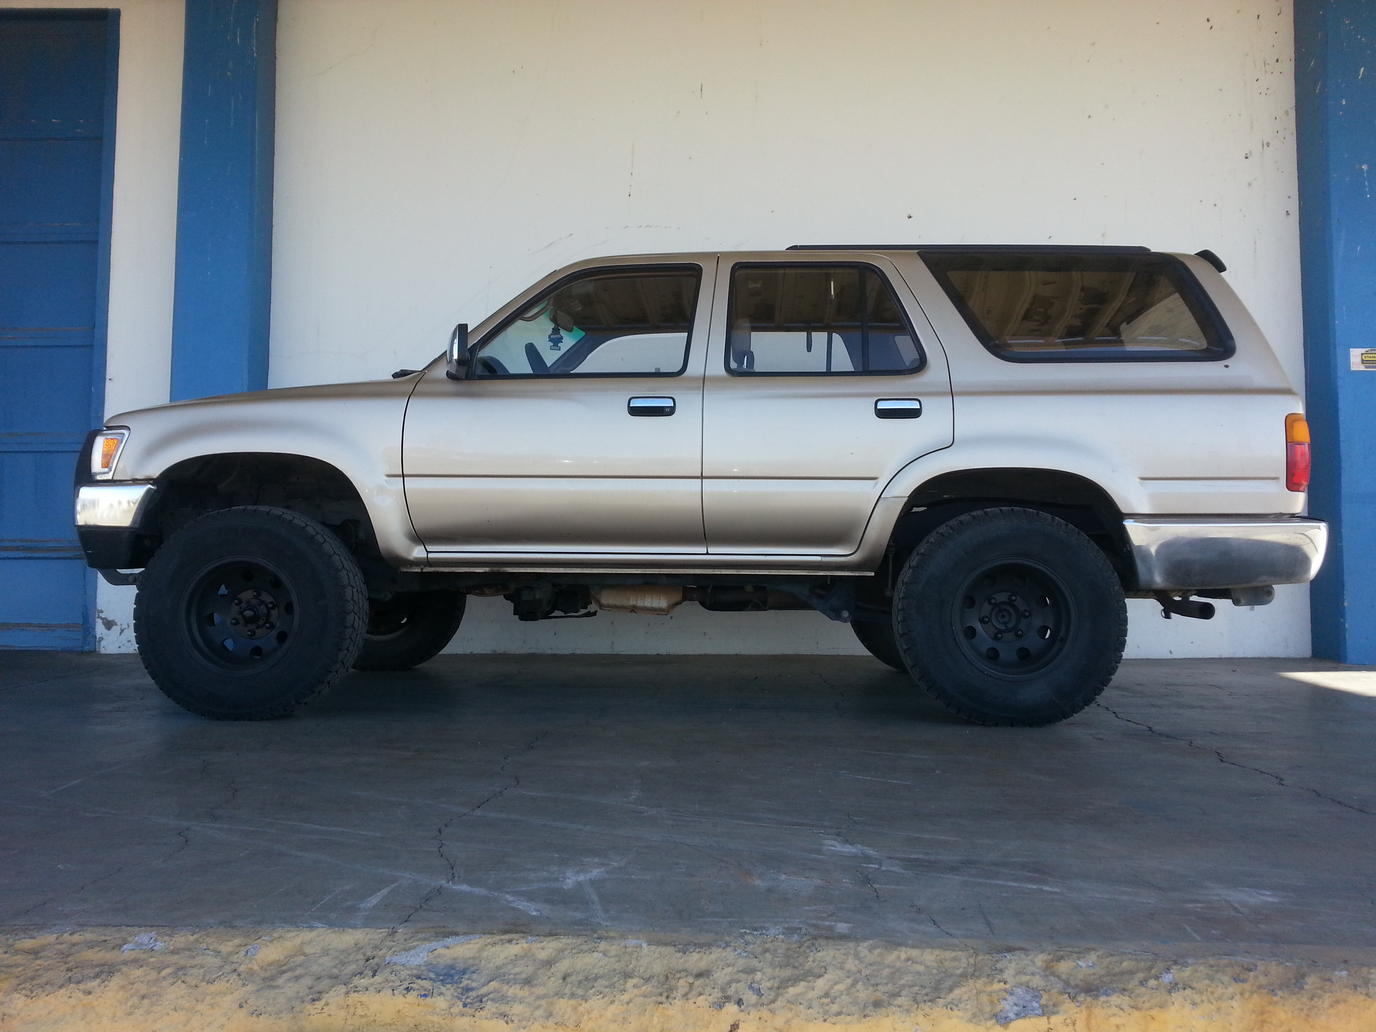 Official Classics Lift and Tire thread-20130405_092426-jpg